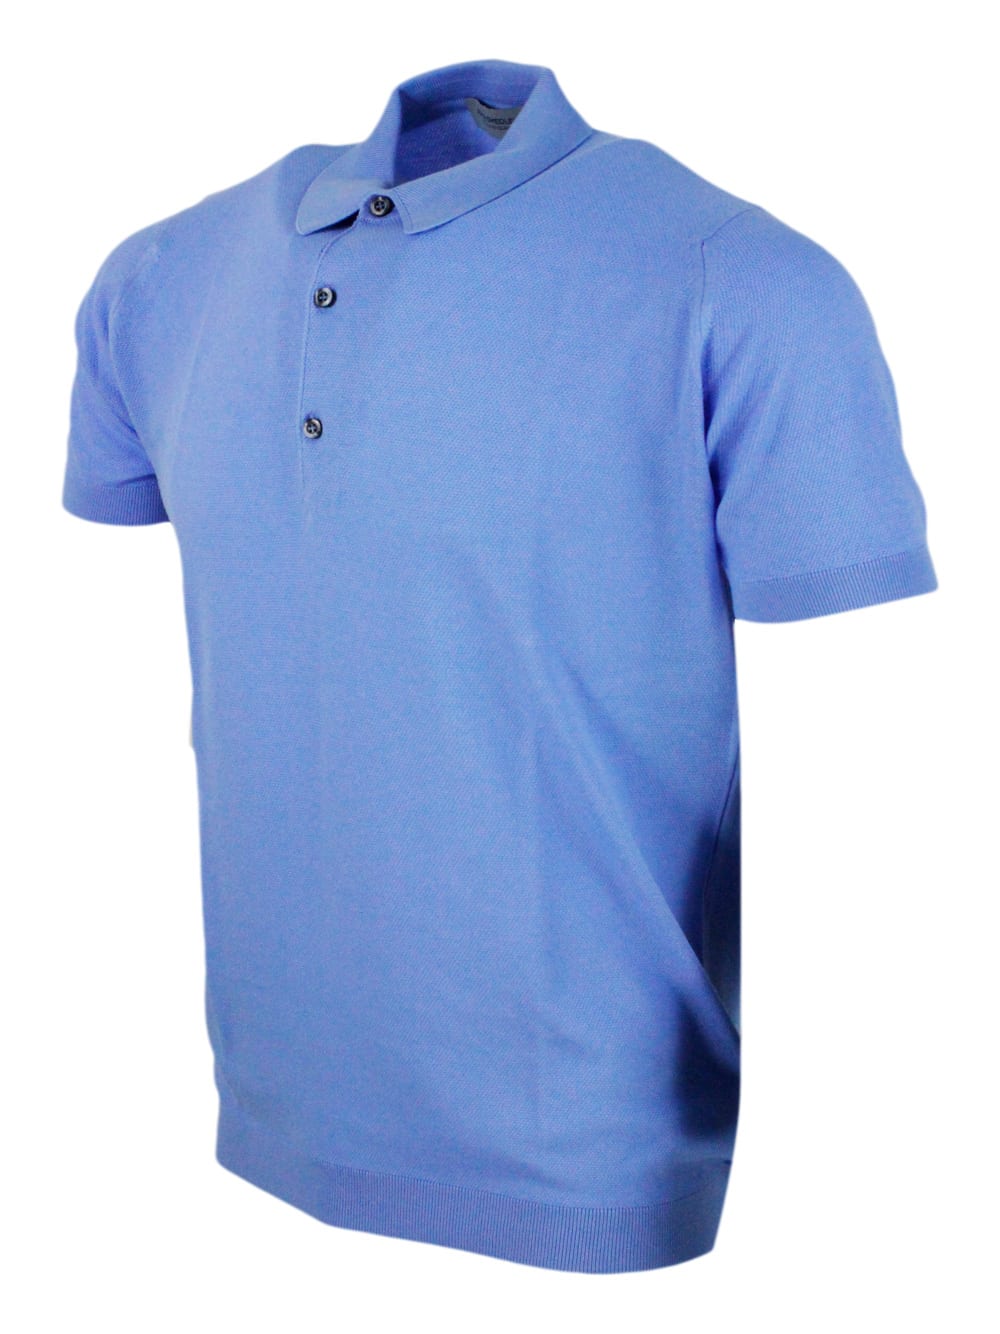 Short-sleeved Polo Shirt In Extrafine Piqué Cotton Thread With Three Buttons